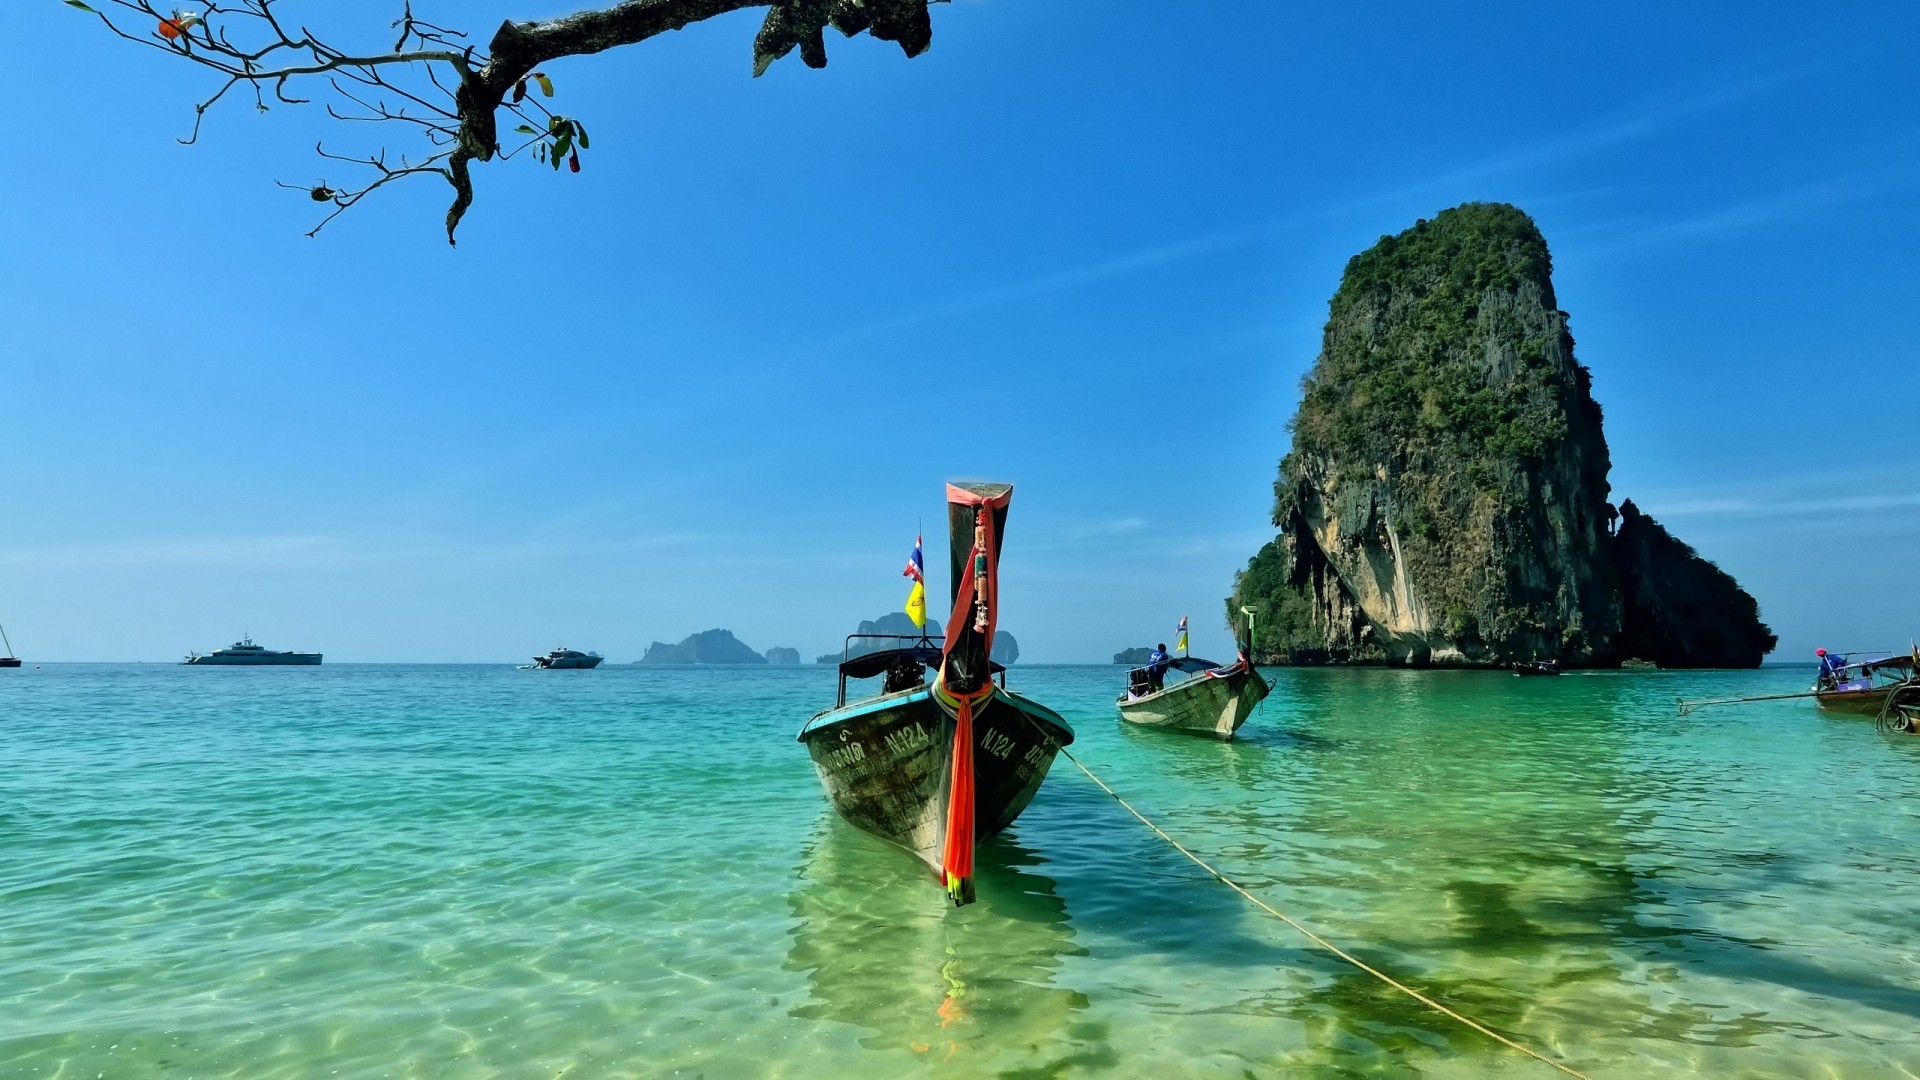 General 1920x1080 Thailand boat cliff sea island Asia water vehicle